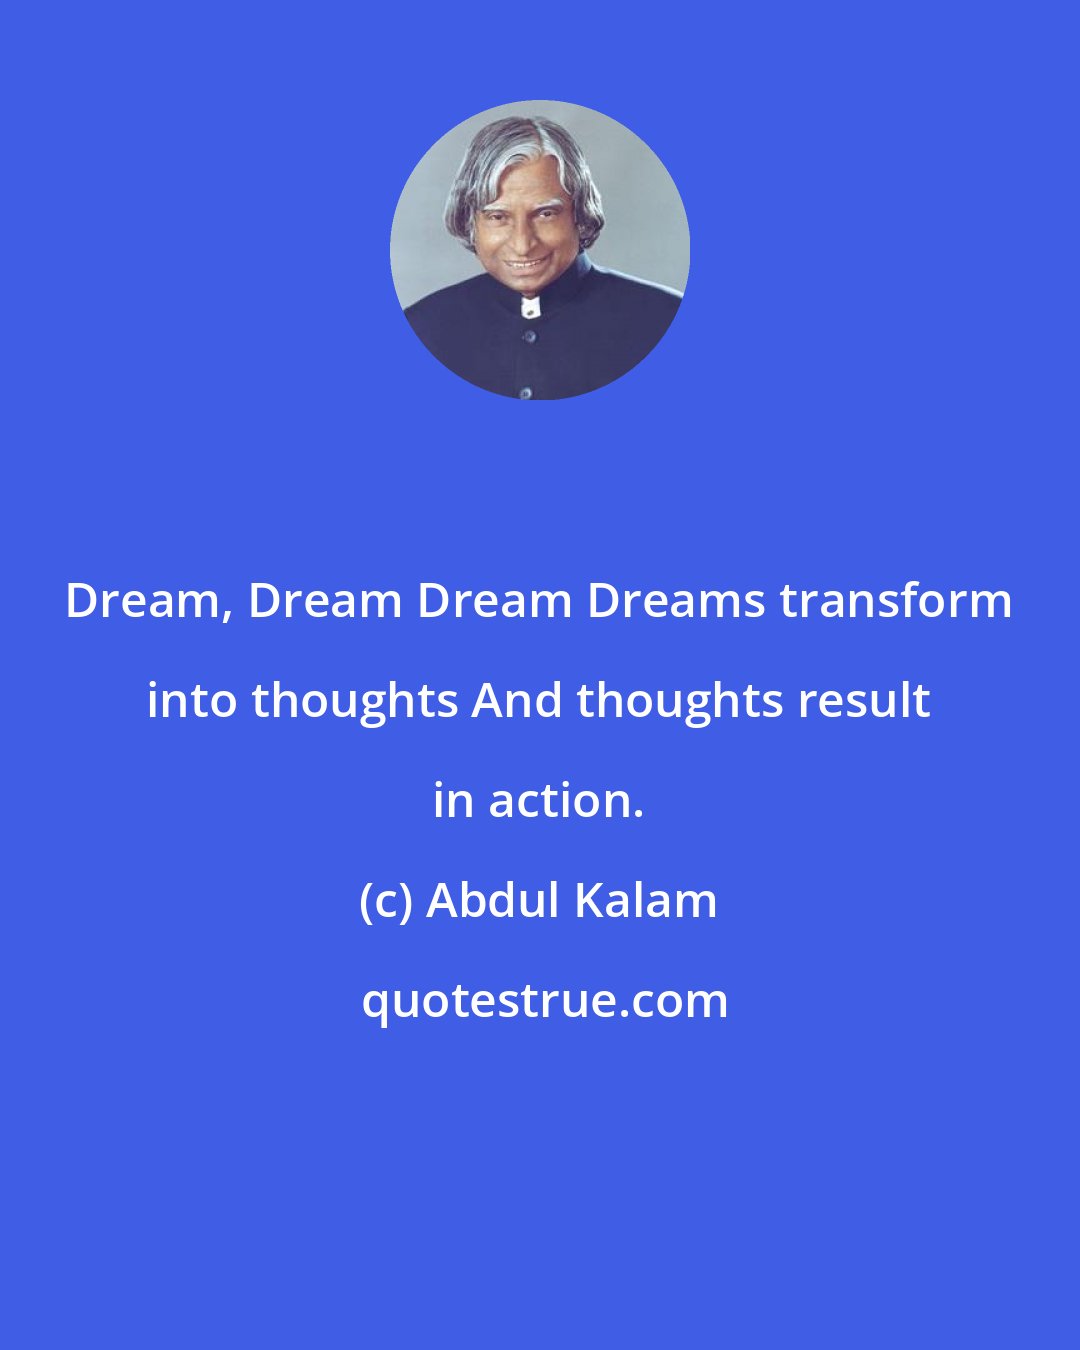 Abdul Kalam: Dream, Dream Dream Dreams transform into thoughts And thoughts result in action.